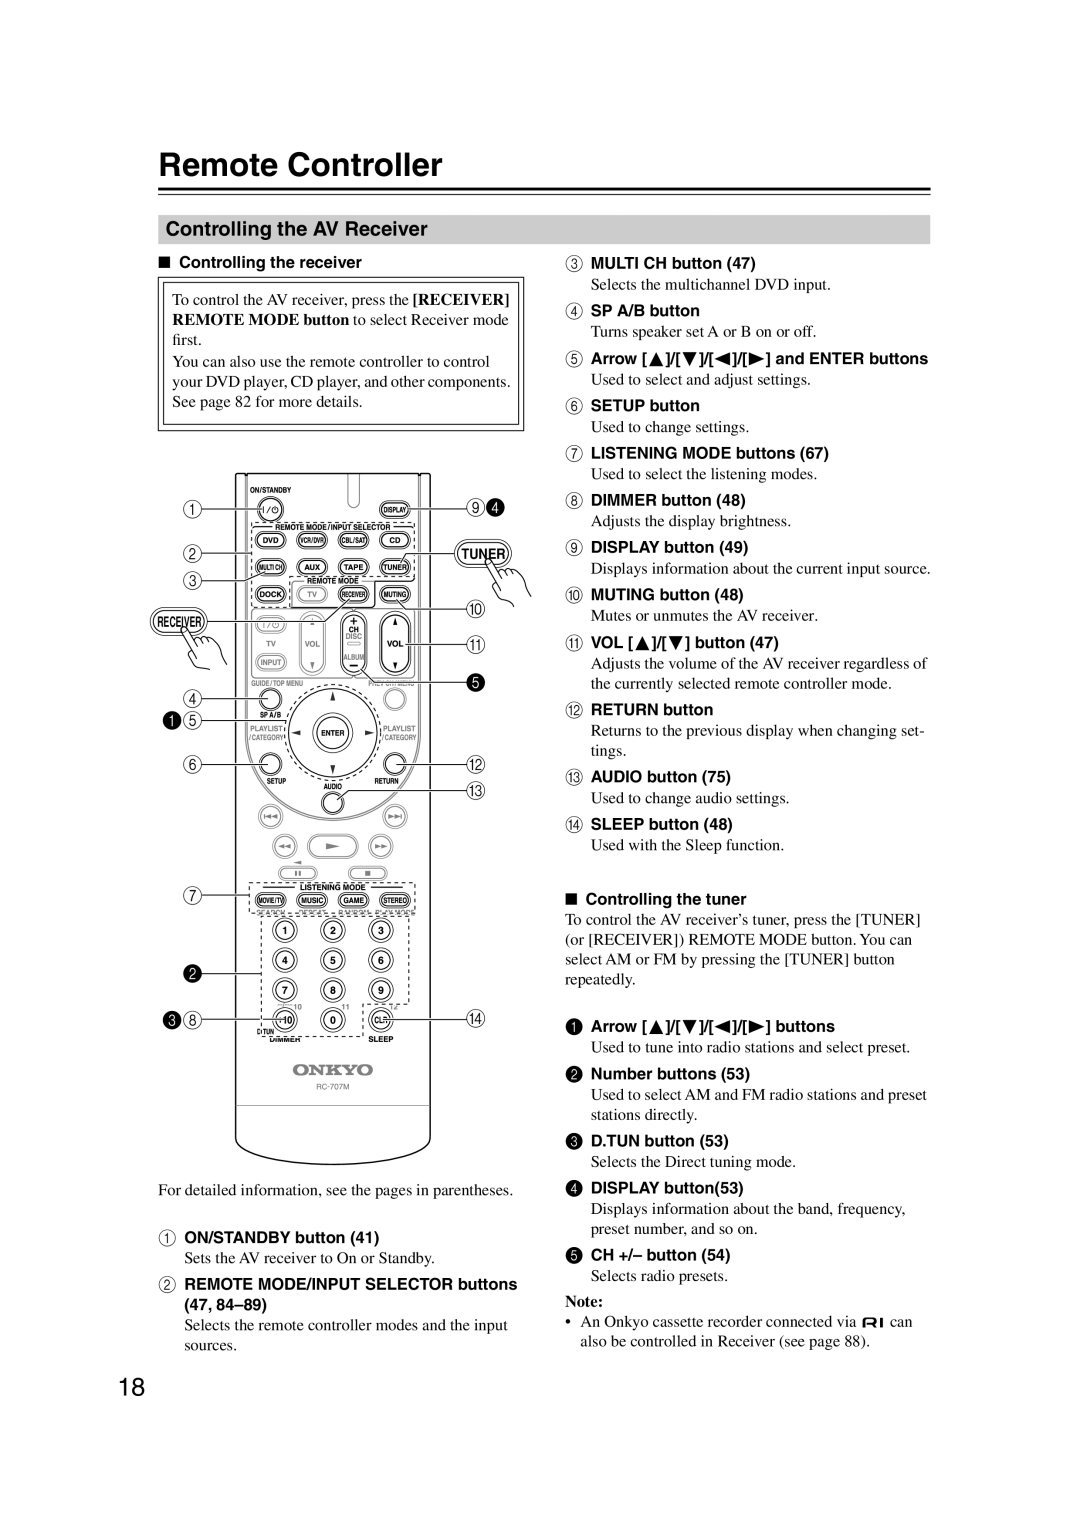 Onkyo HT-S5100 instruction manual Remote Controller, Controlling the AV Receiver, 2 38 